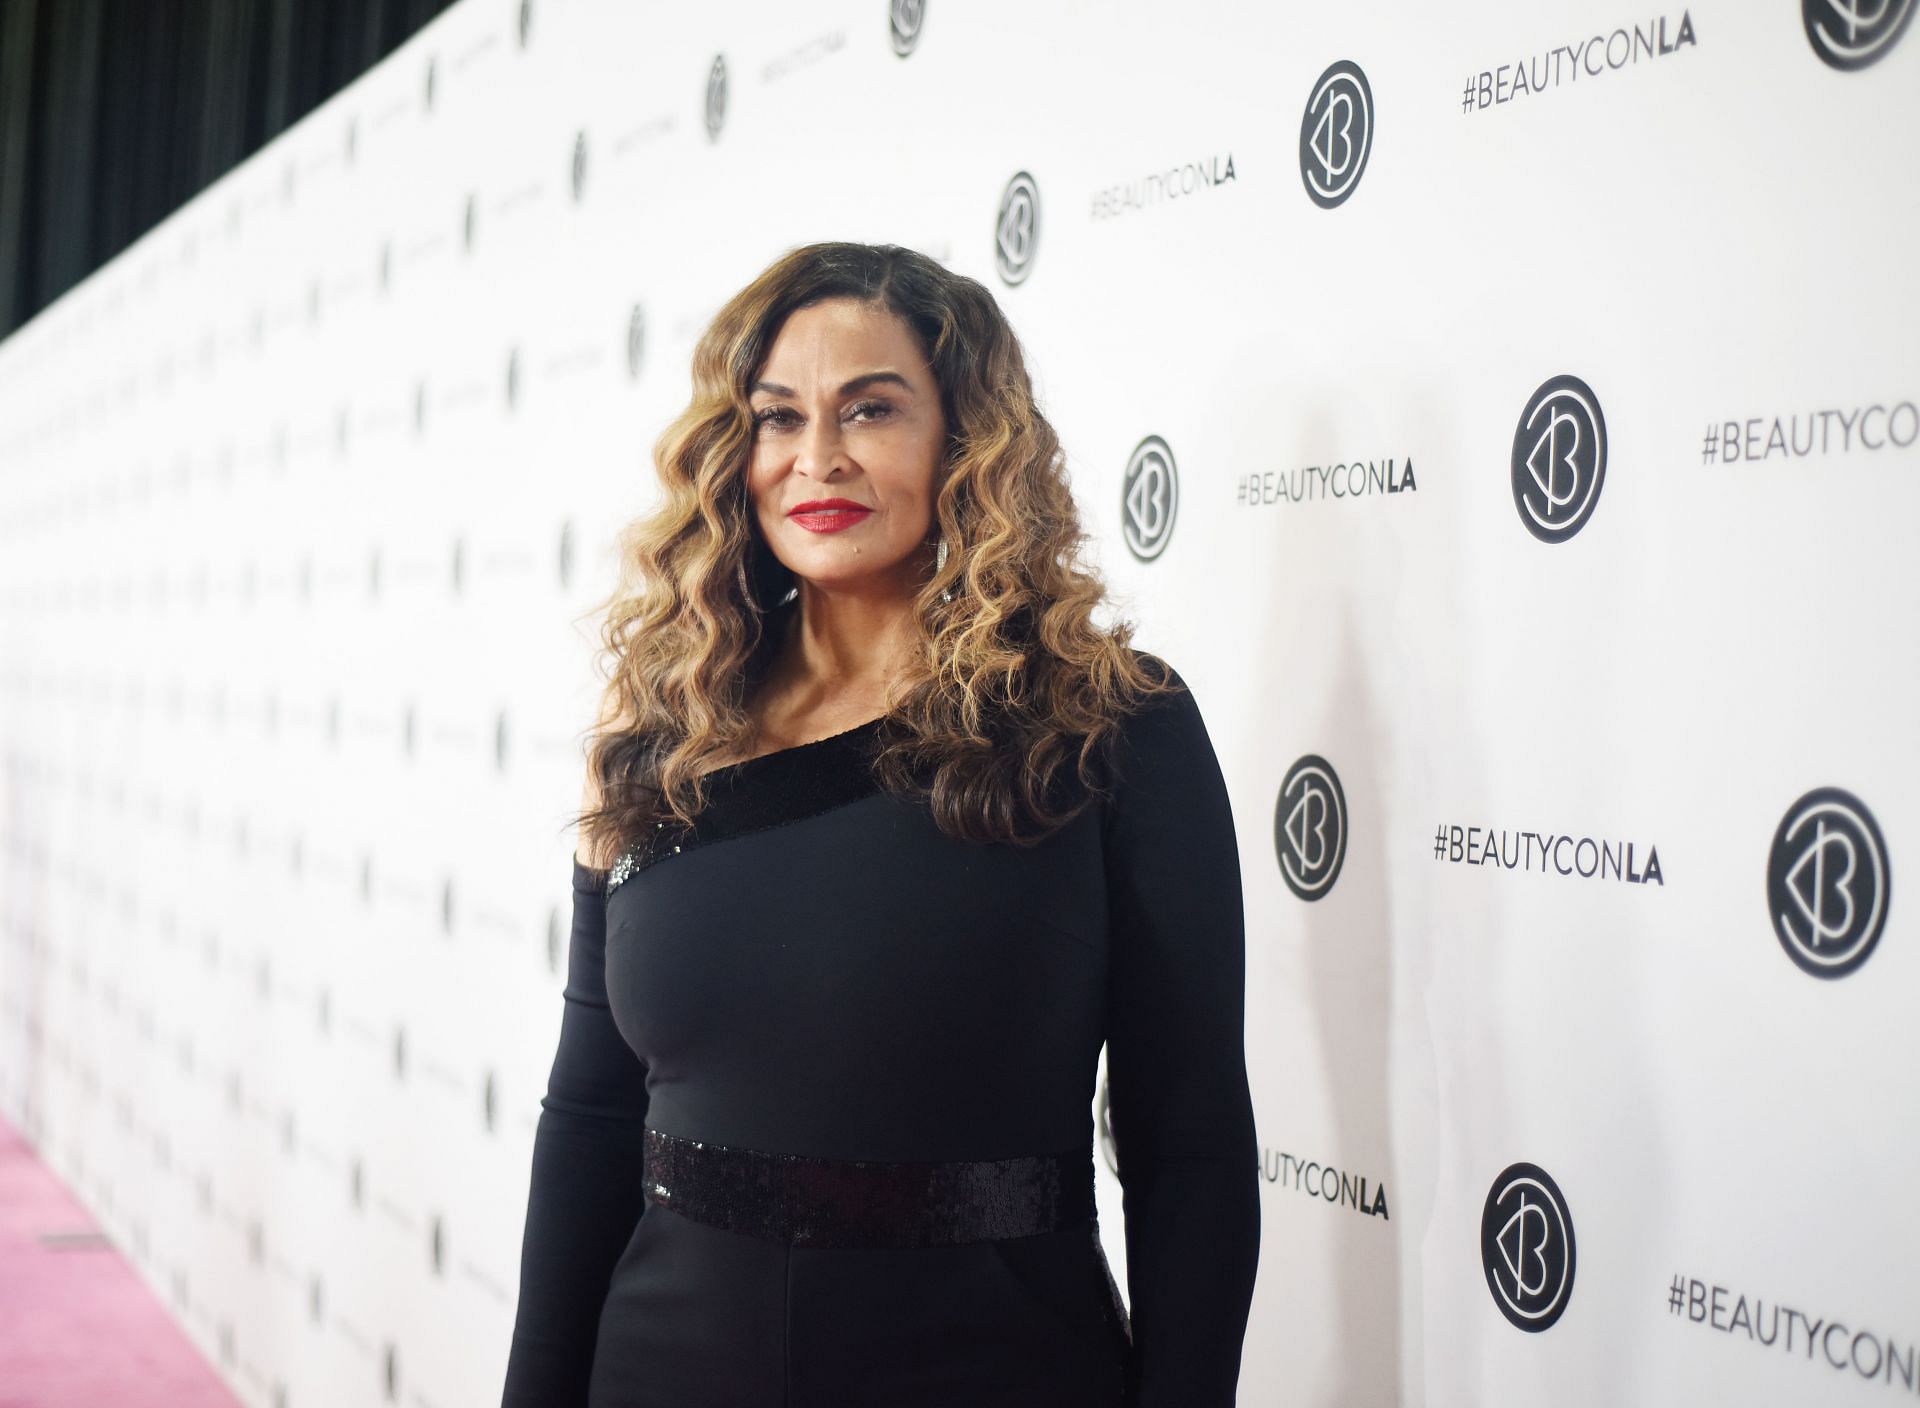 Tina Knowles at Beautycon Festival Los Angeles 2019 (Photo by Araya Diaz/Getty Images for Beautycon)